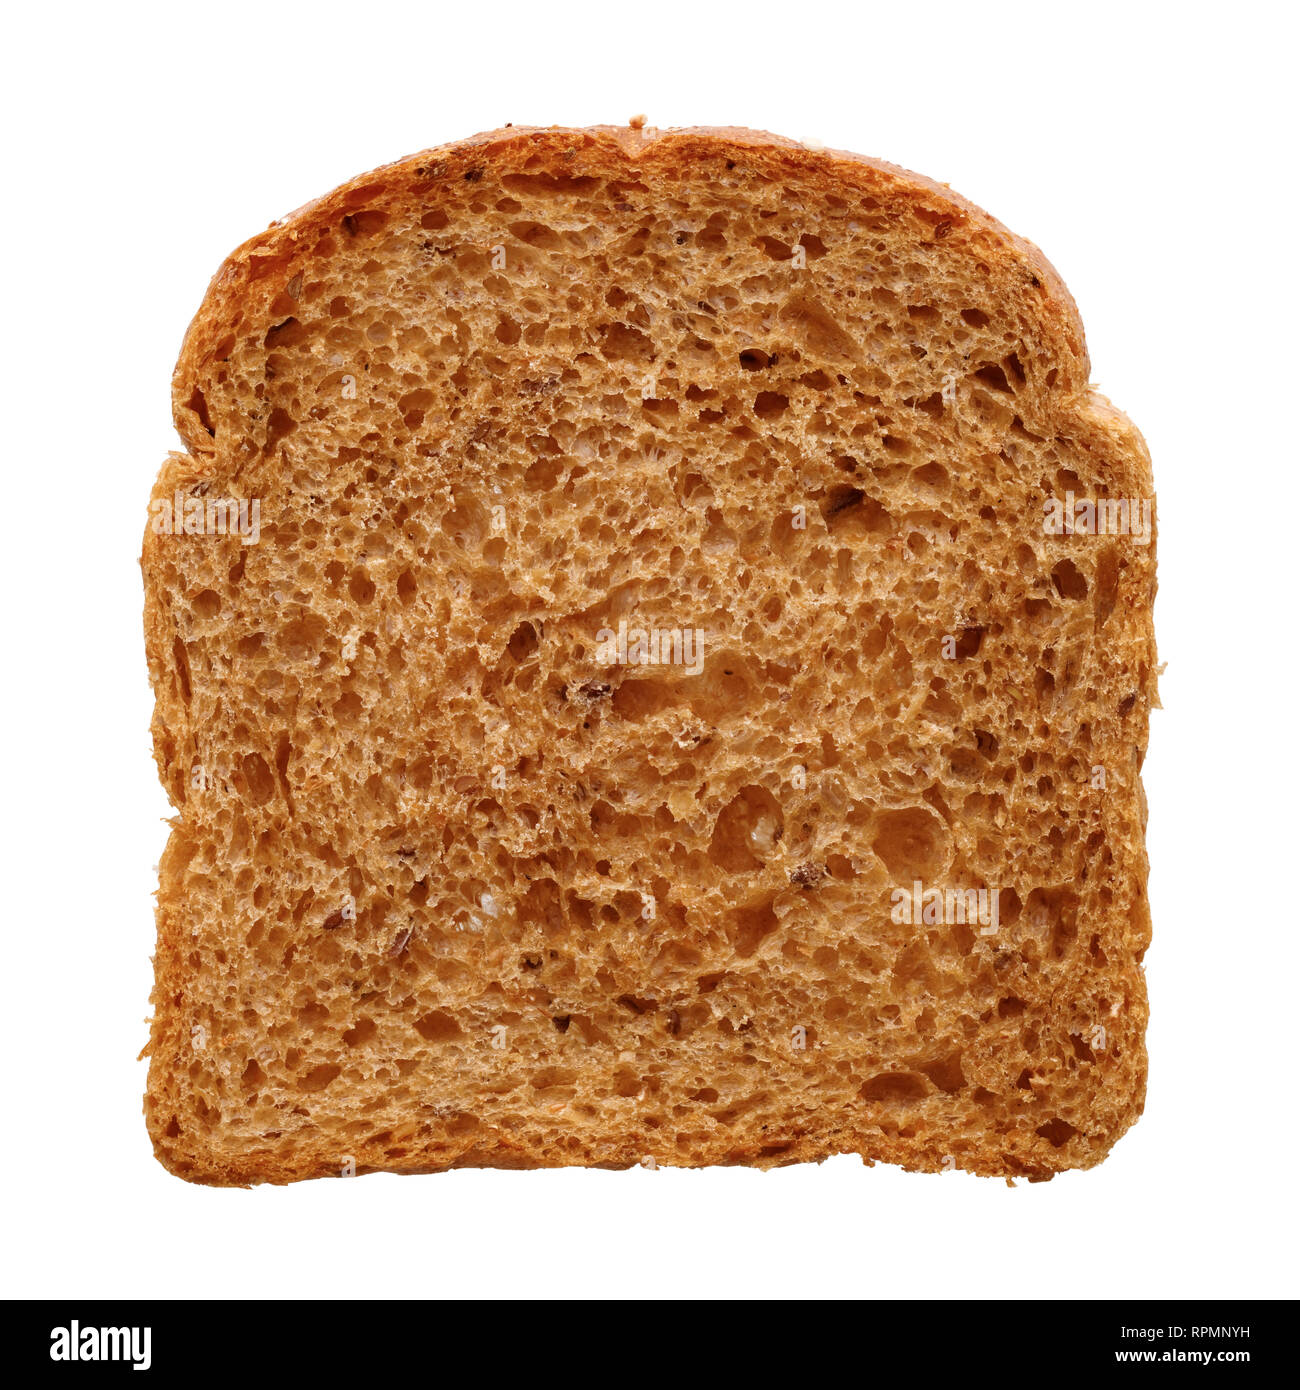 Food and drinks: single slice of fresh multigrain bread, isolated on white background Stock Photo